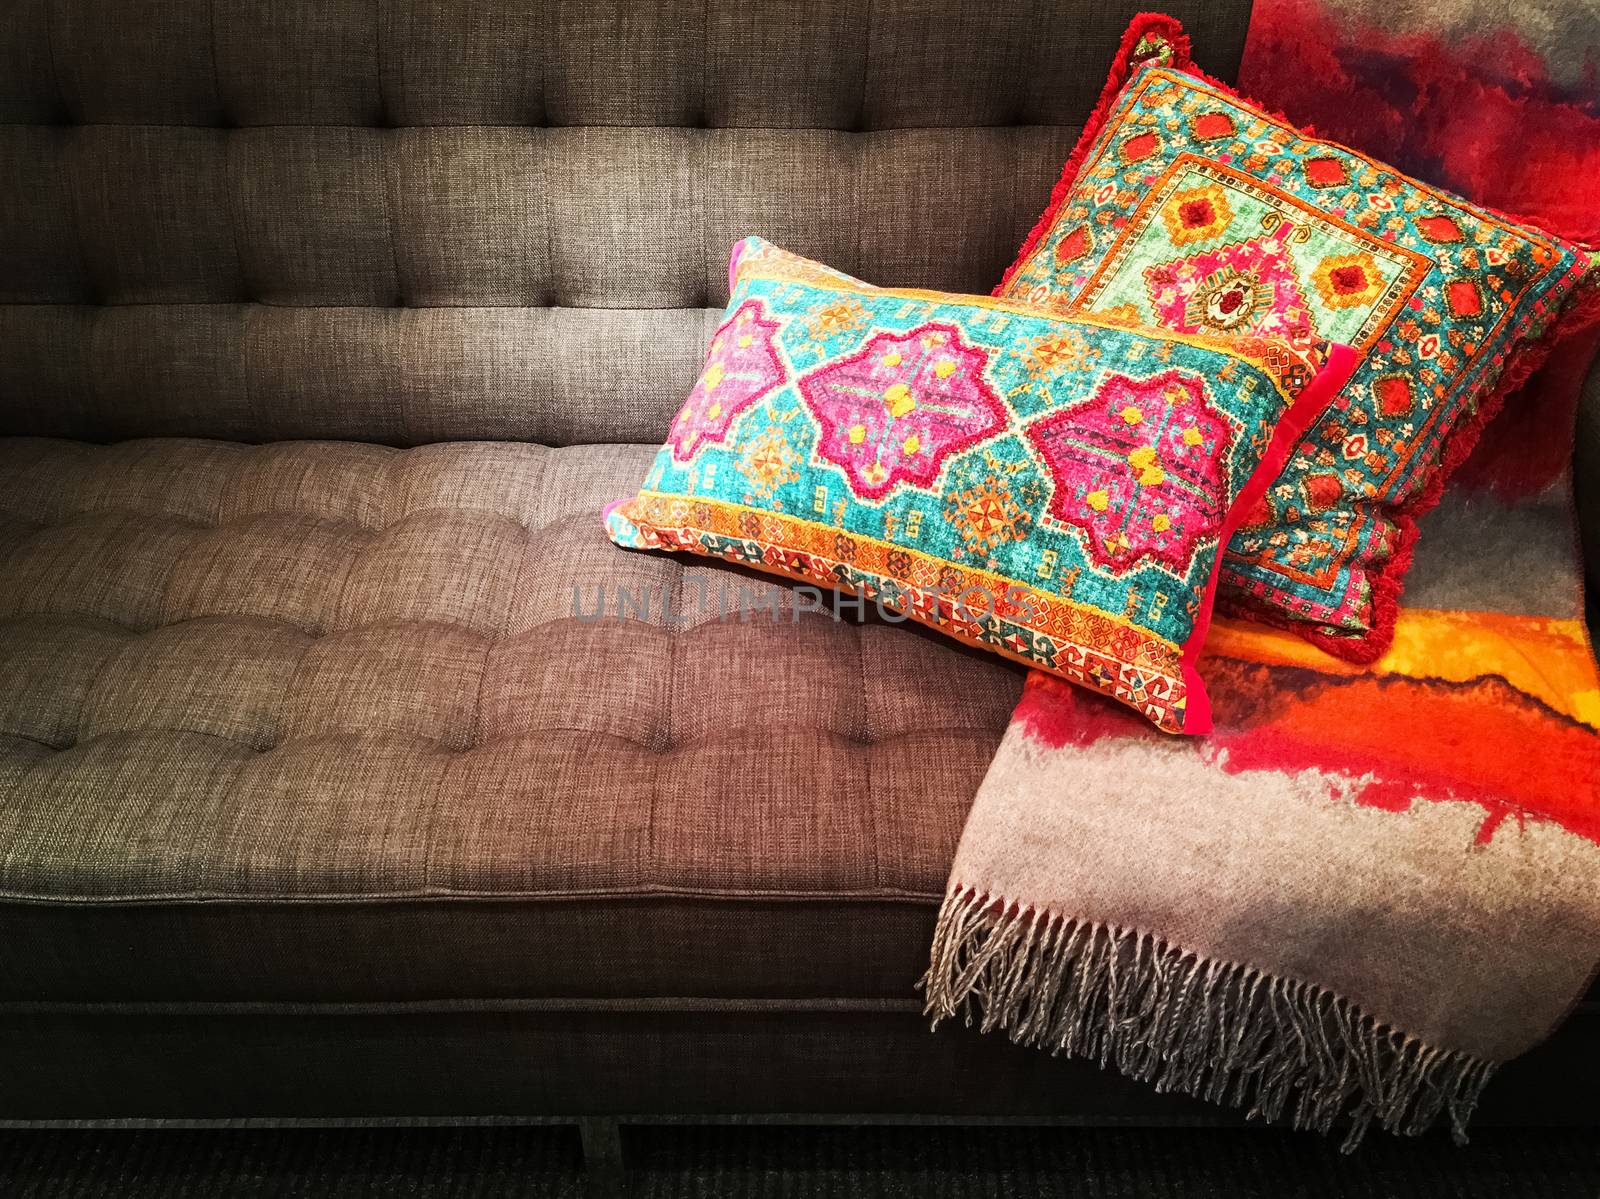 Textile sofa decorated with bright ornate cushions by anikasalsera